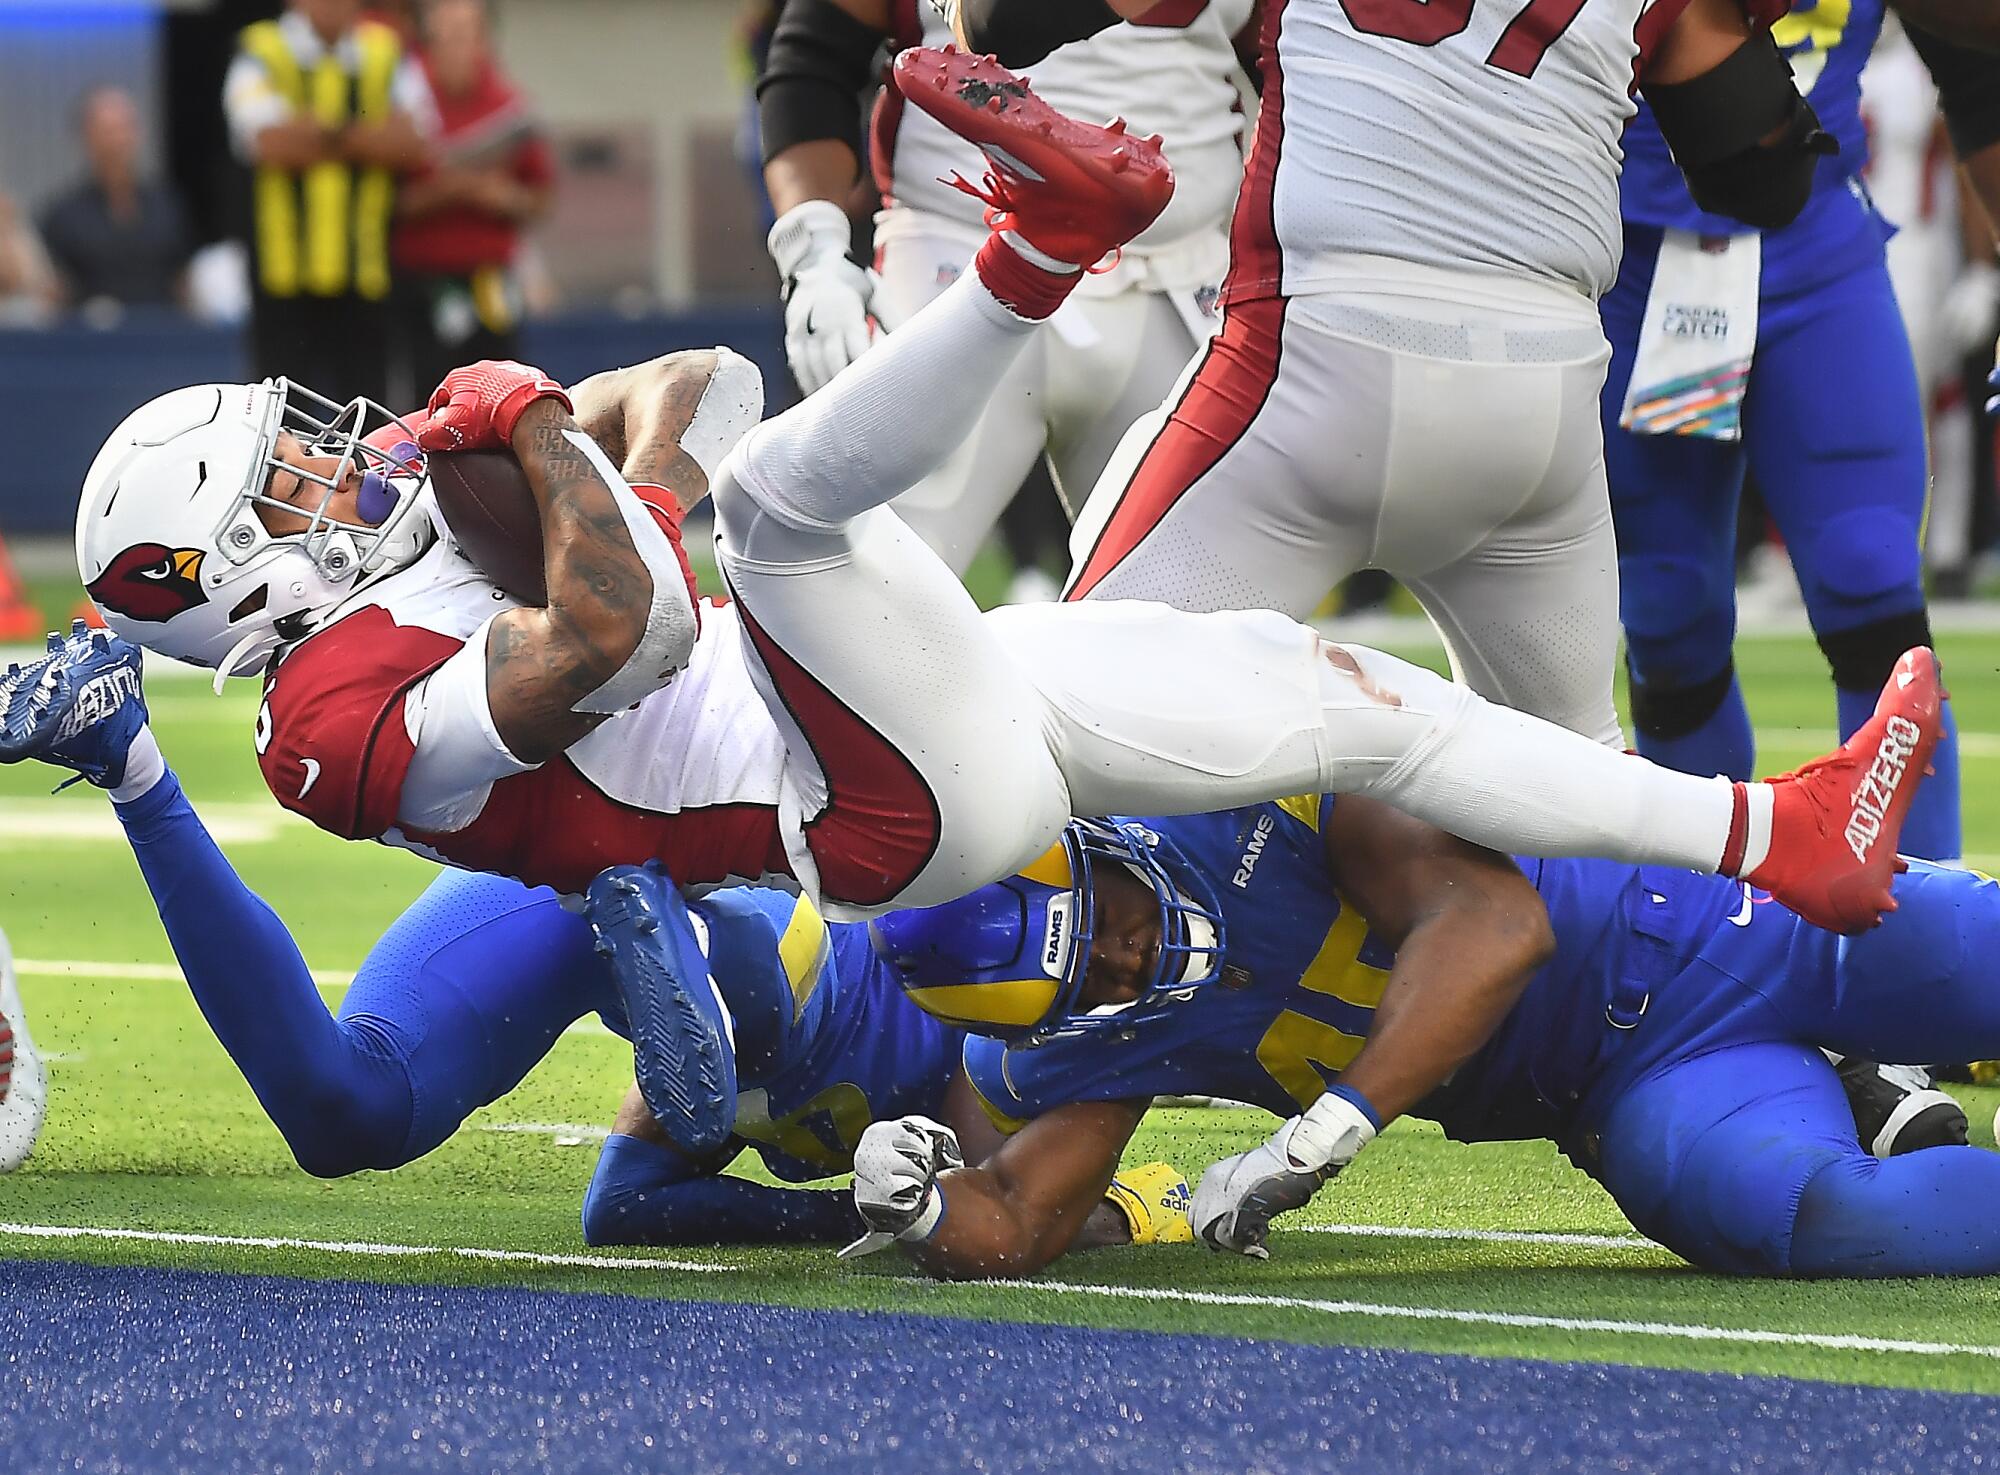 Cardinals running back James Conner scores a touchdown against the Rams' defense in the third quarter.